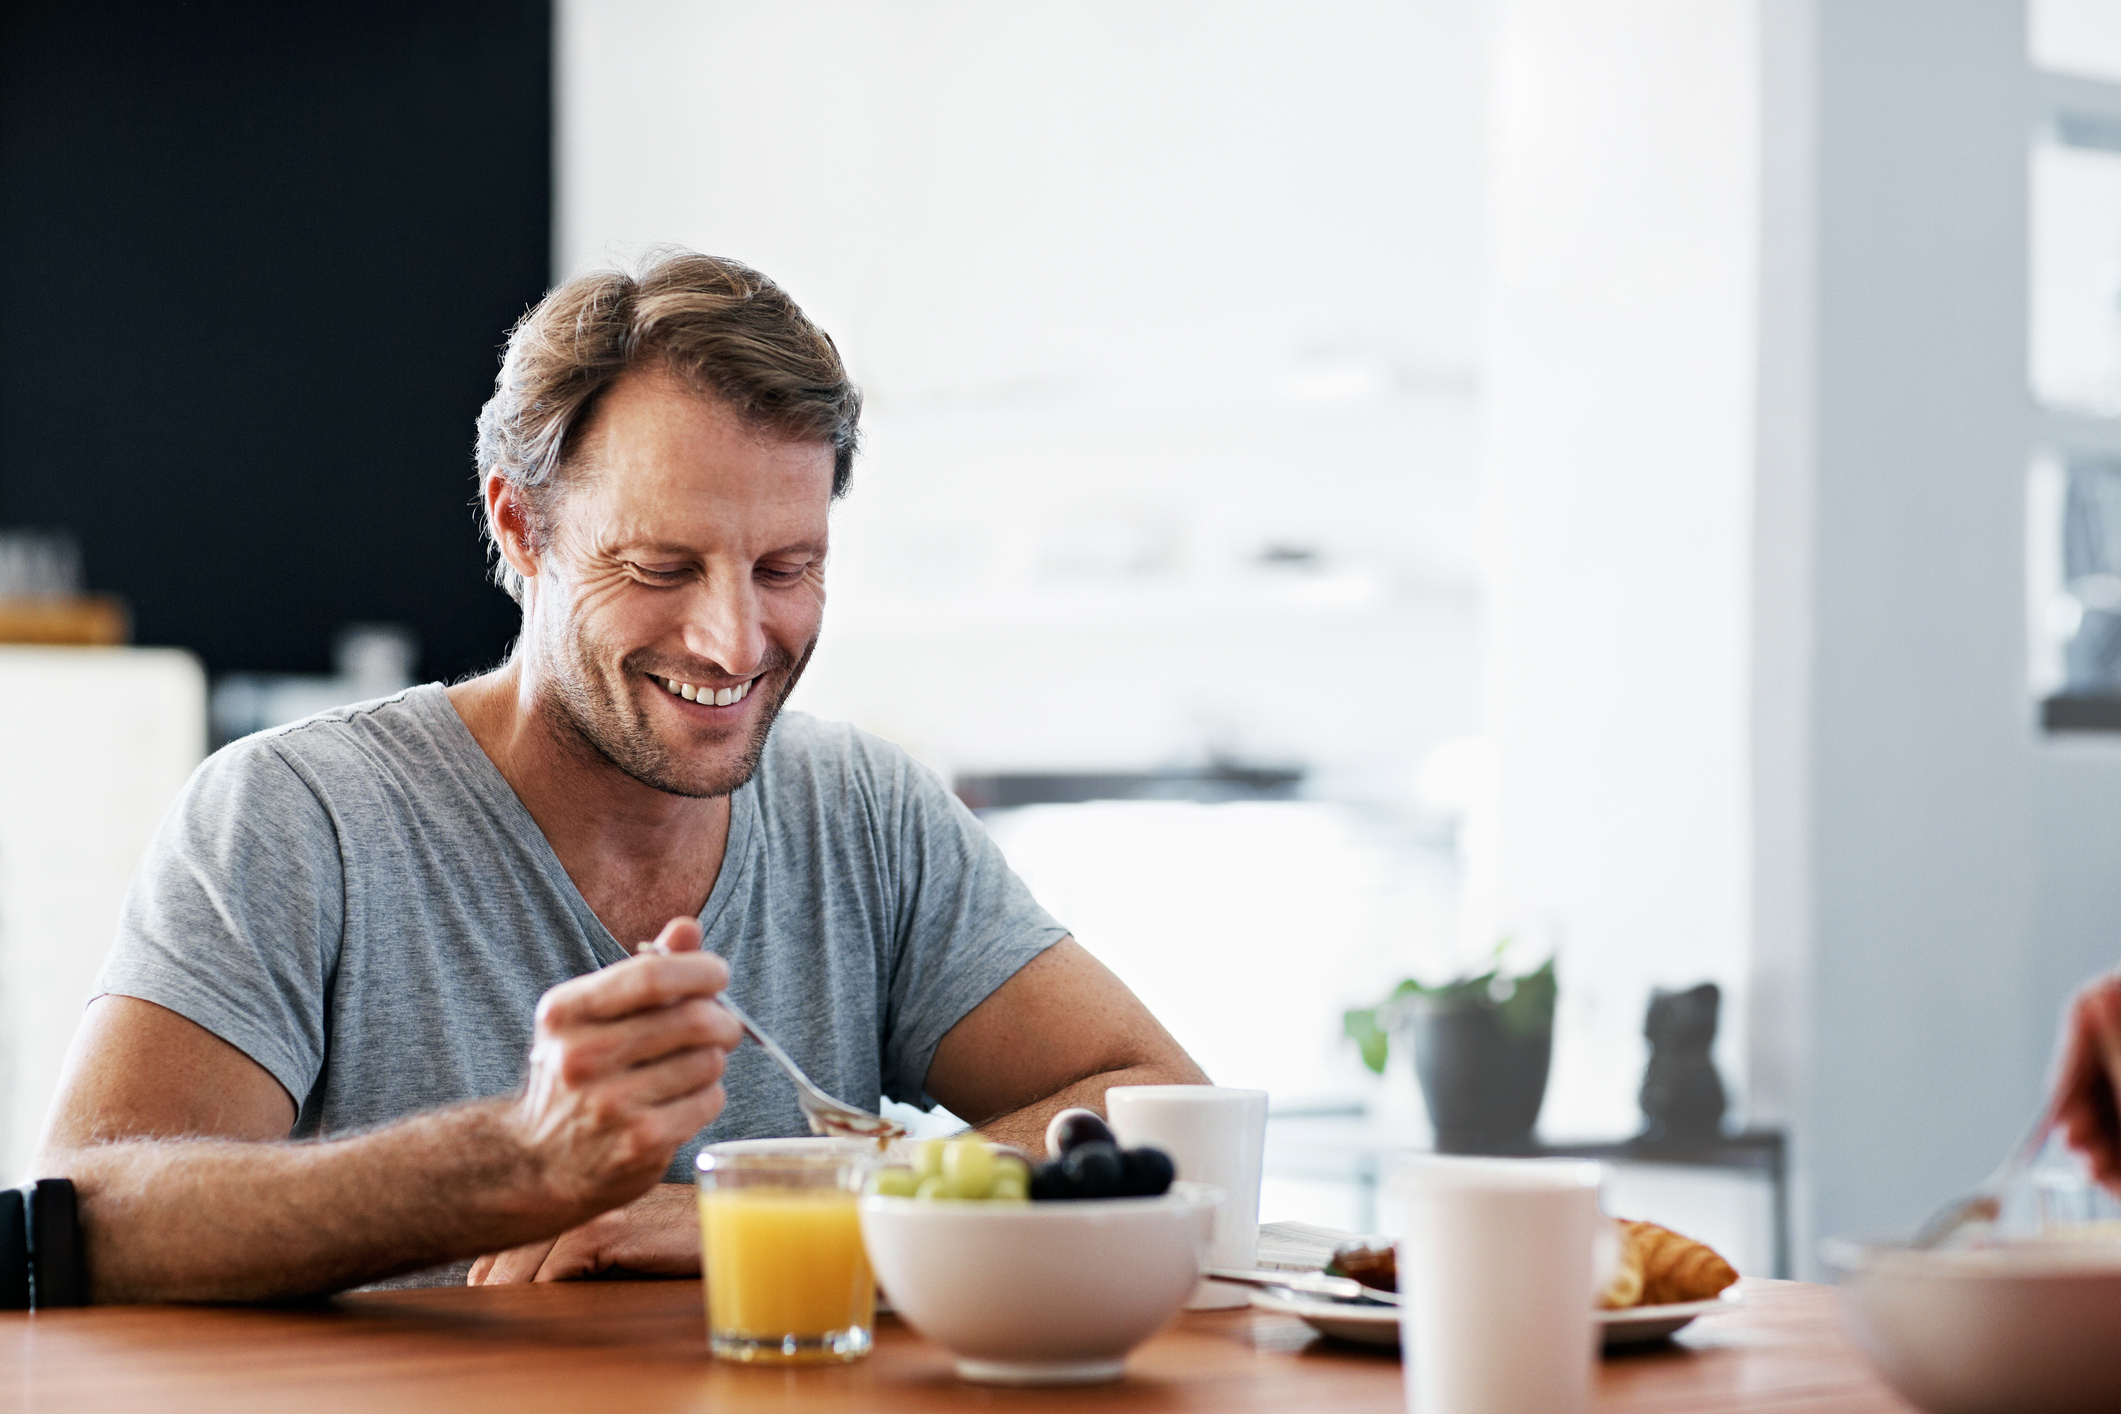 How an early breakfast can help you dodge diabetes